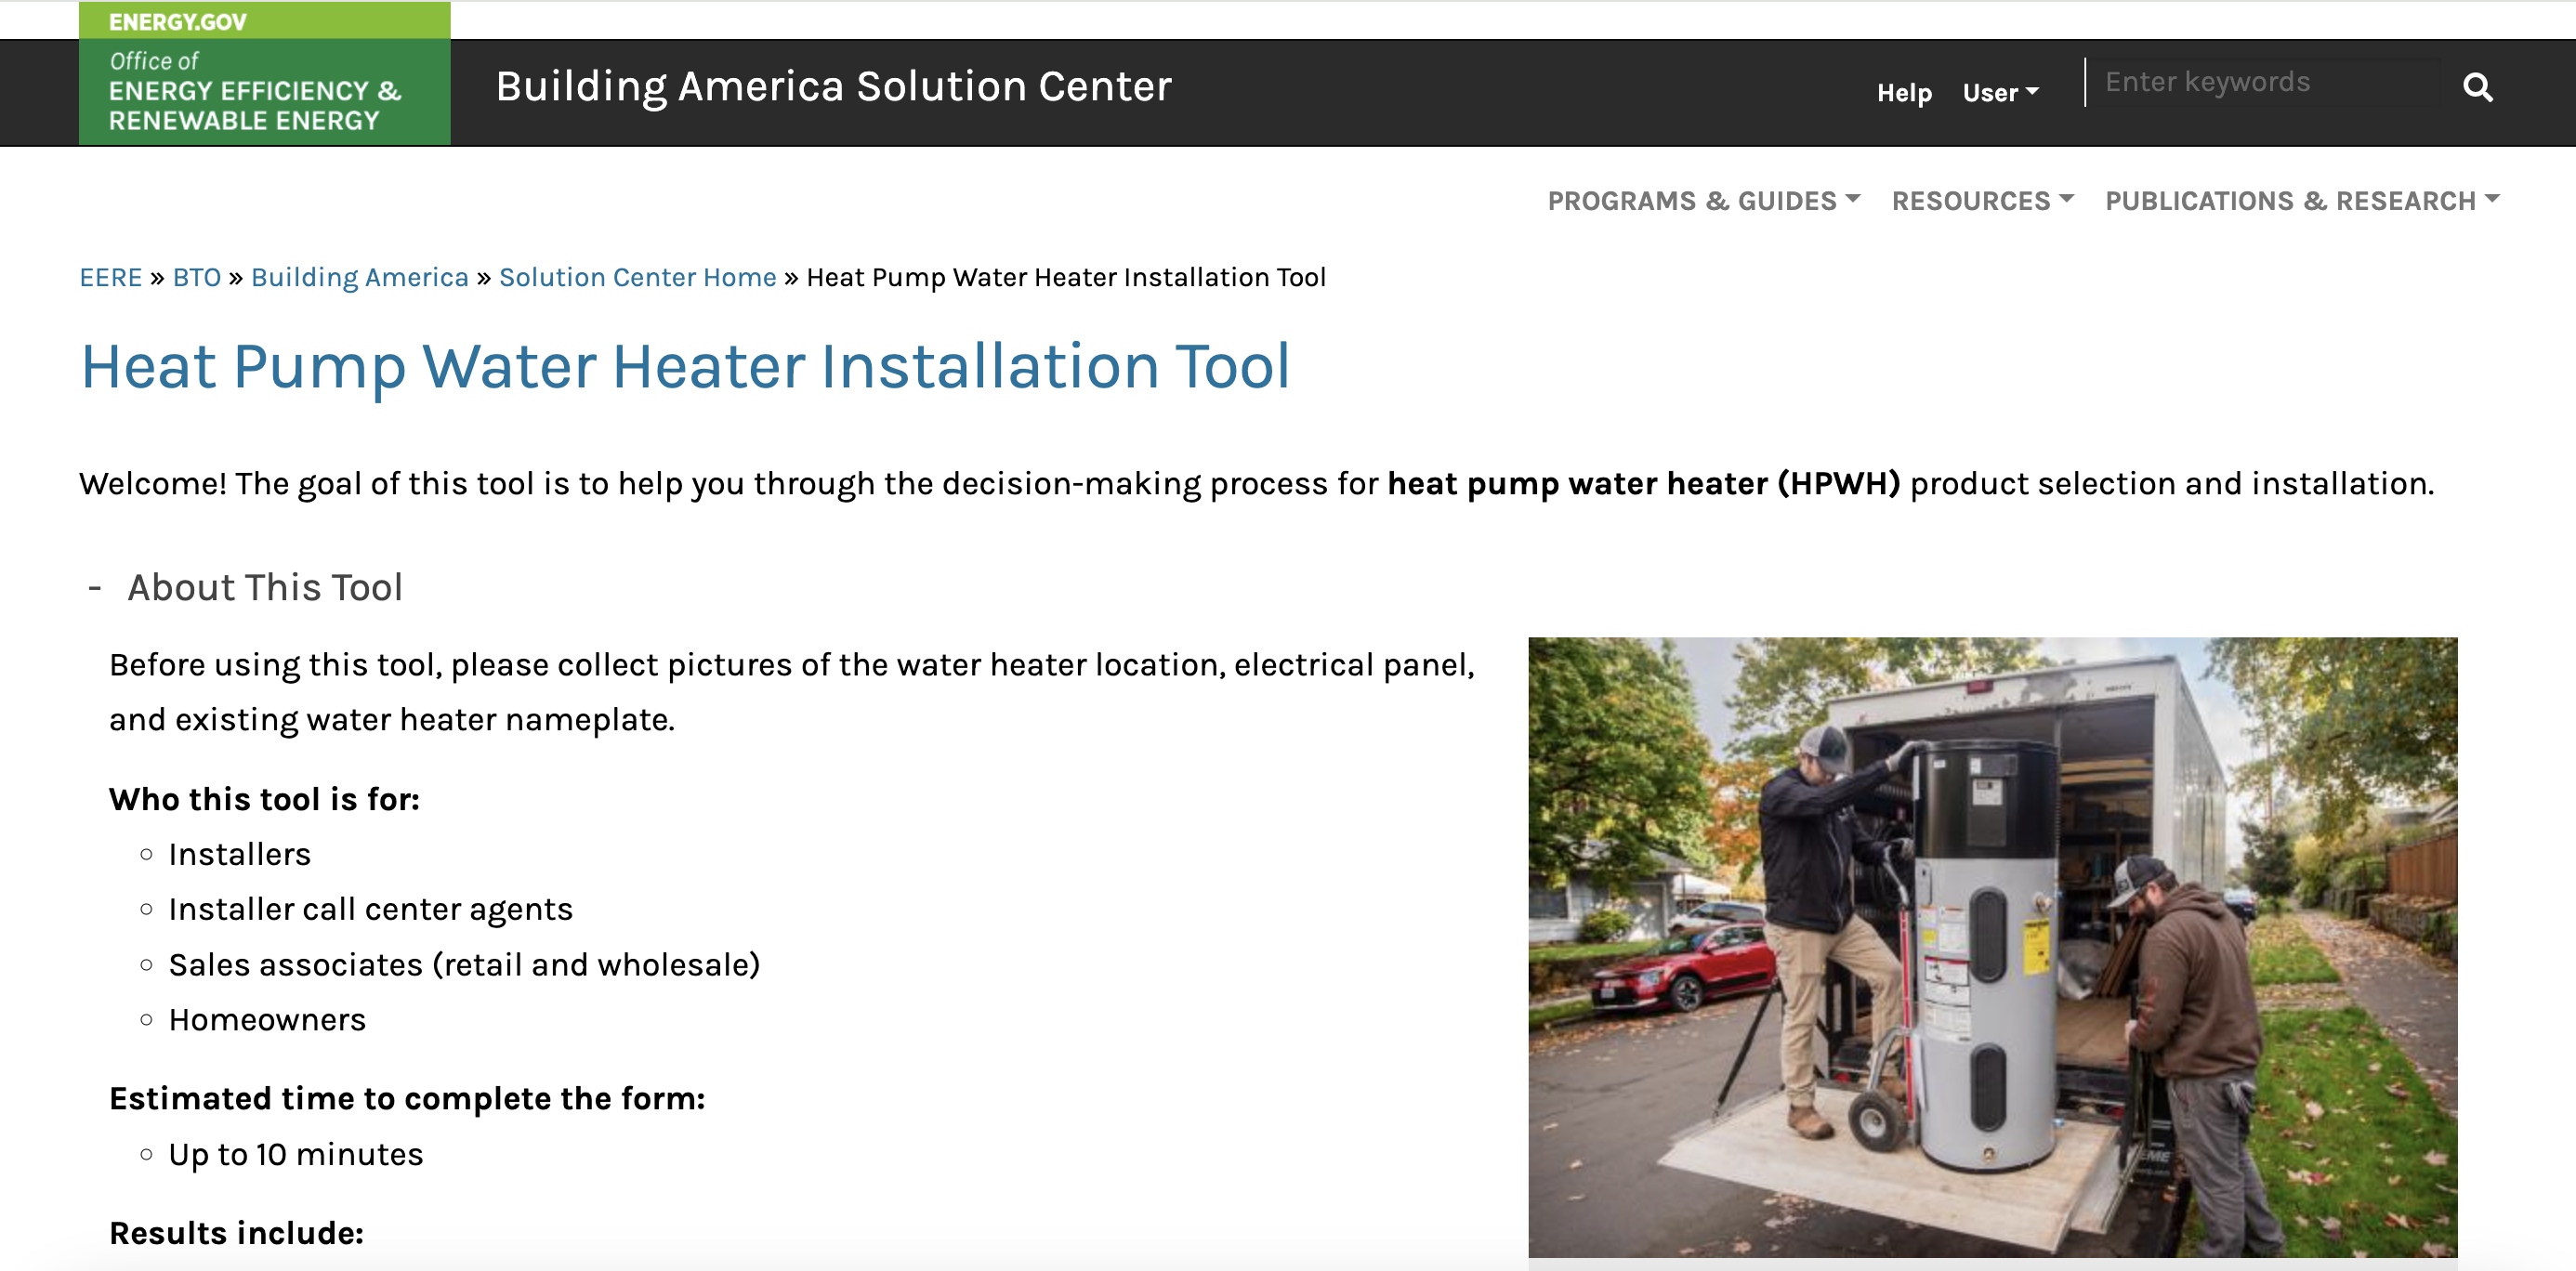 New tool helps with selection, installation of heat pump water heaters